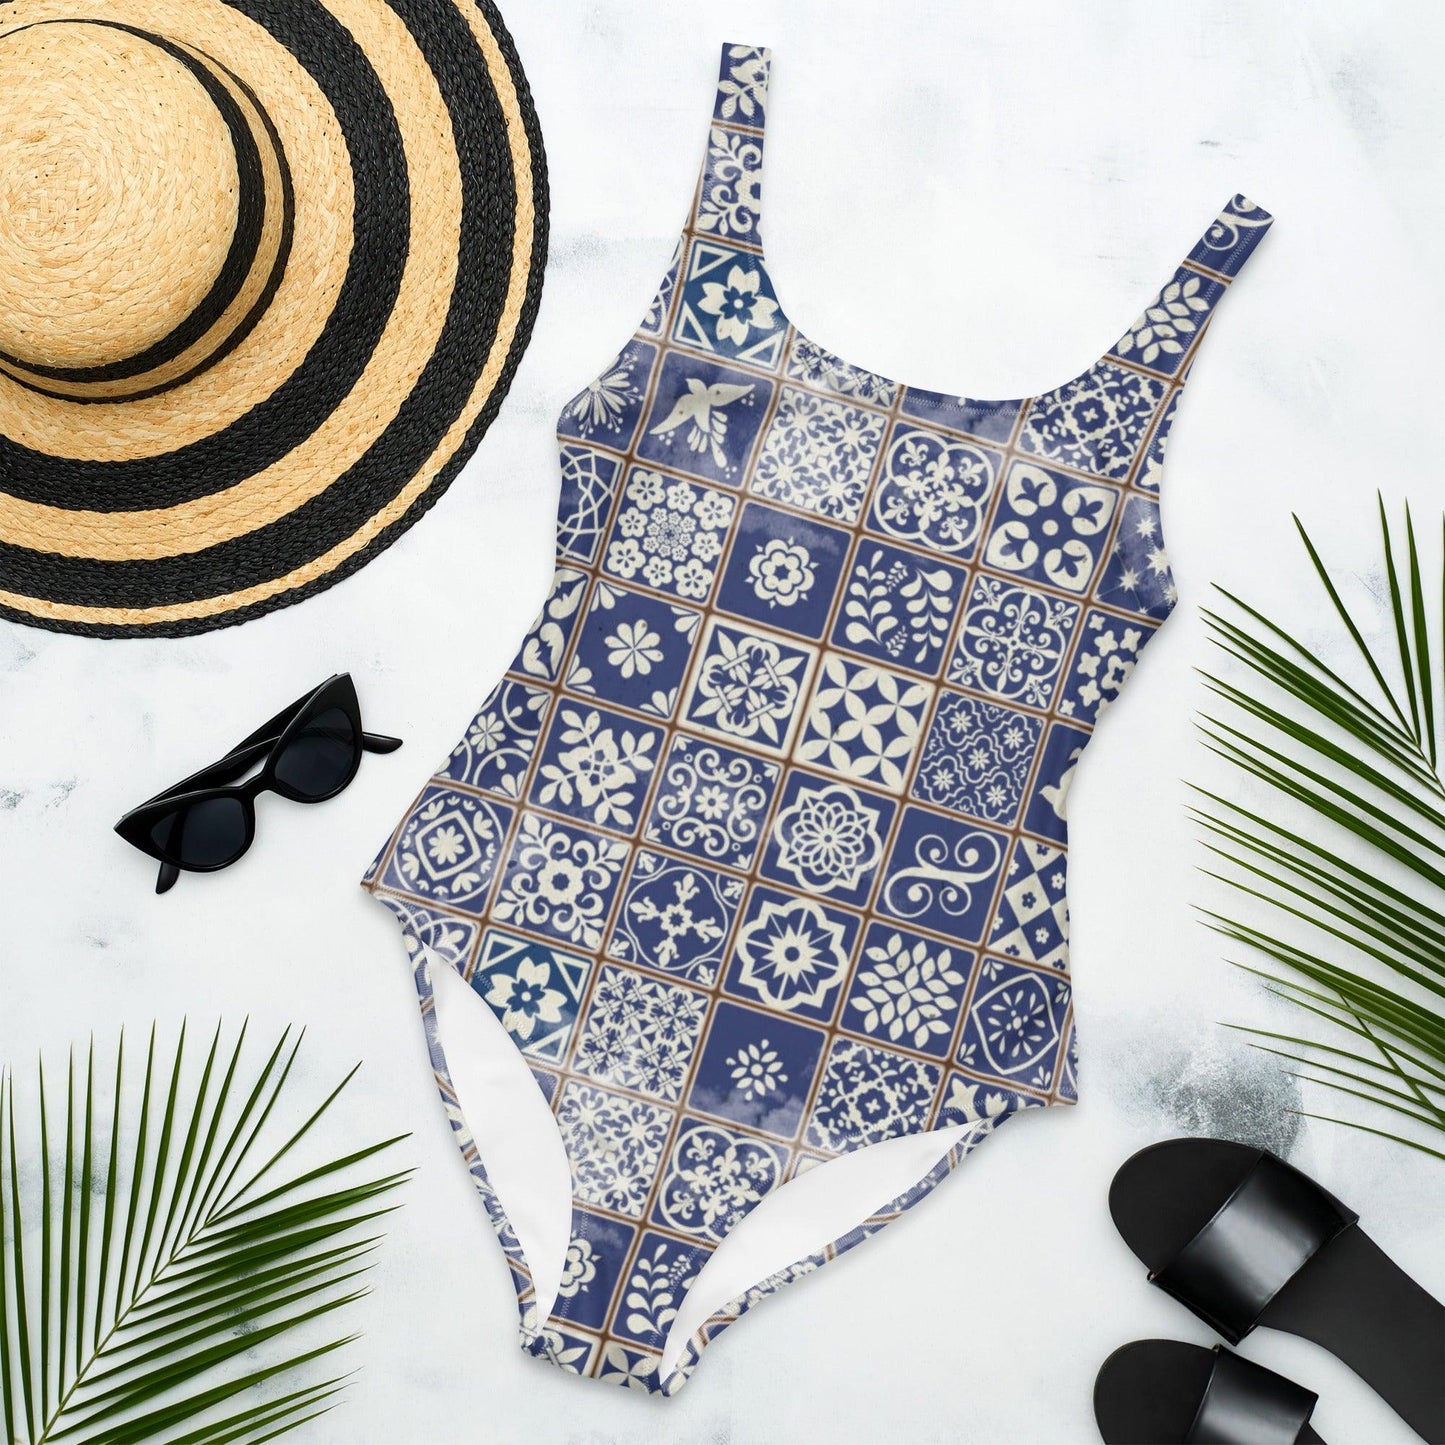 Portuguese Tile One-Piece Swimsuit - The Global Wanderer